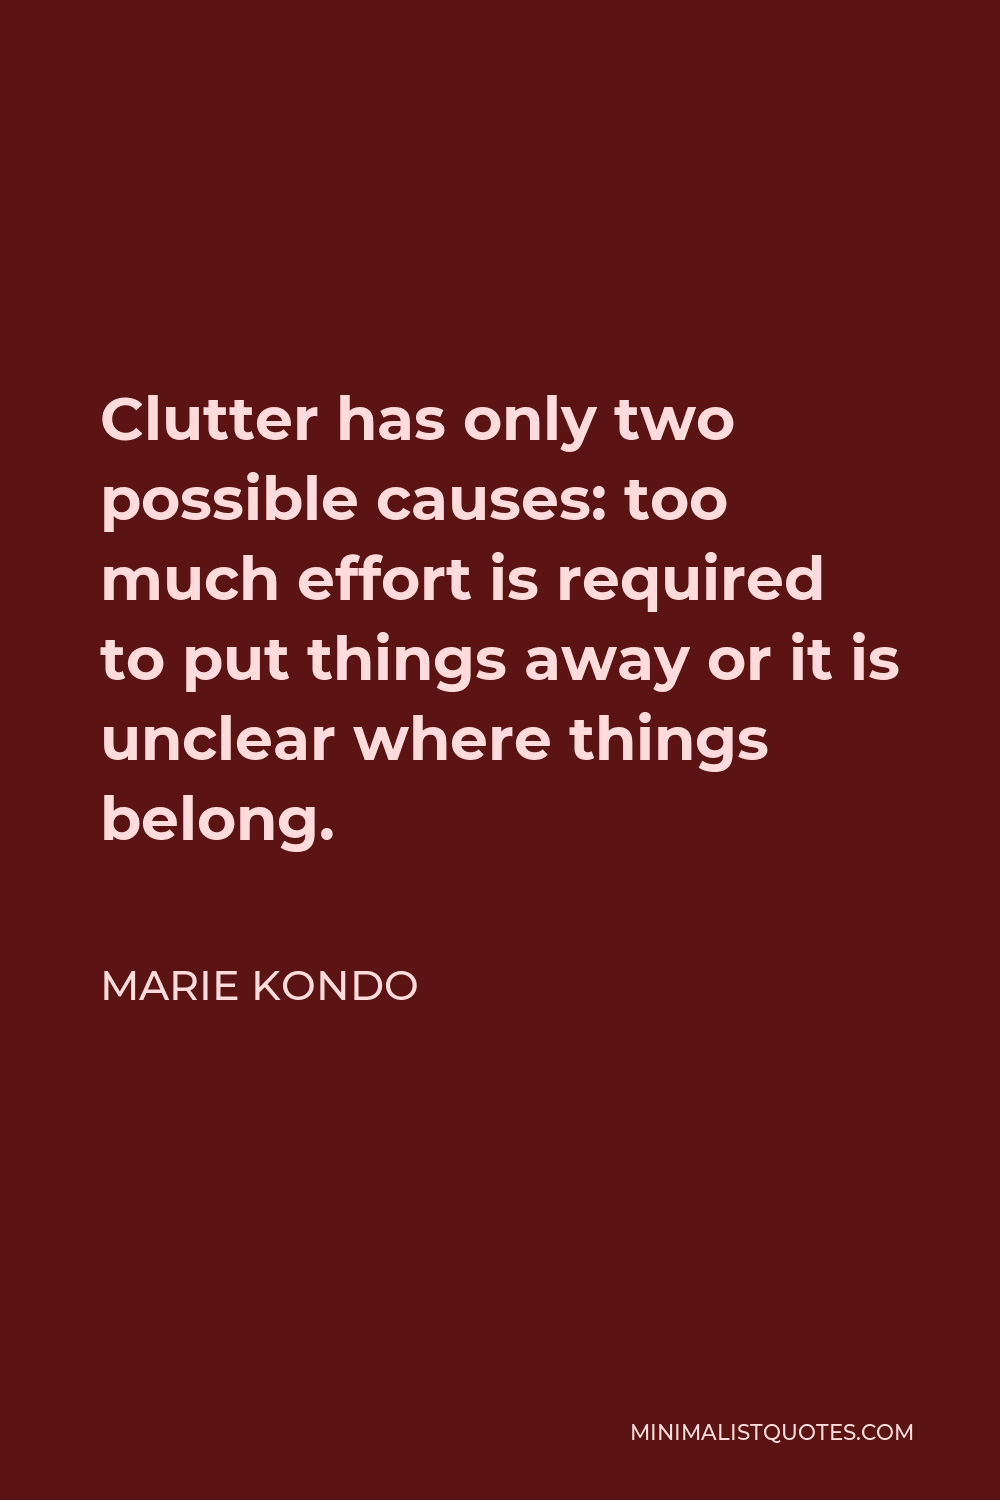 Marie Kondo Quote - Clutter has only two possible causes: too much effort is required to put things away or it is unclear where things belong.